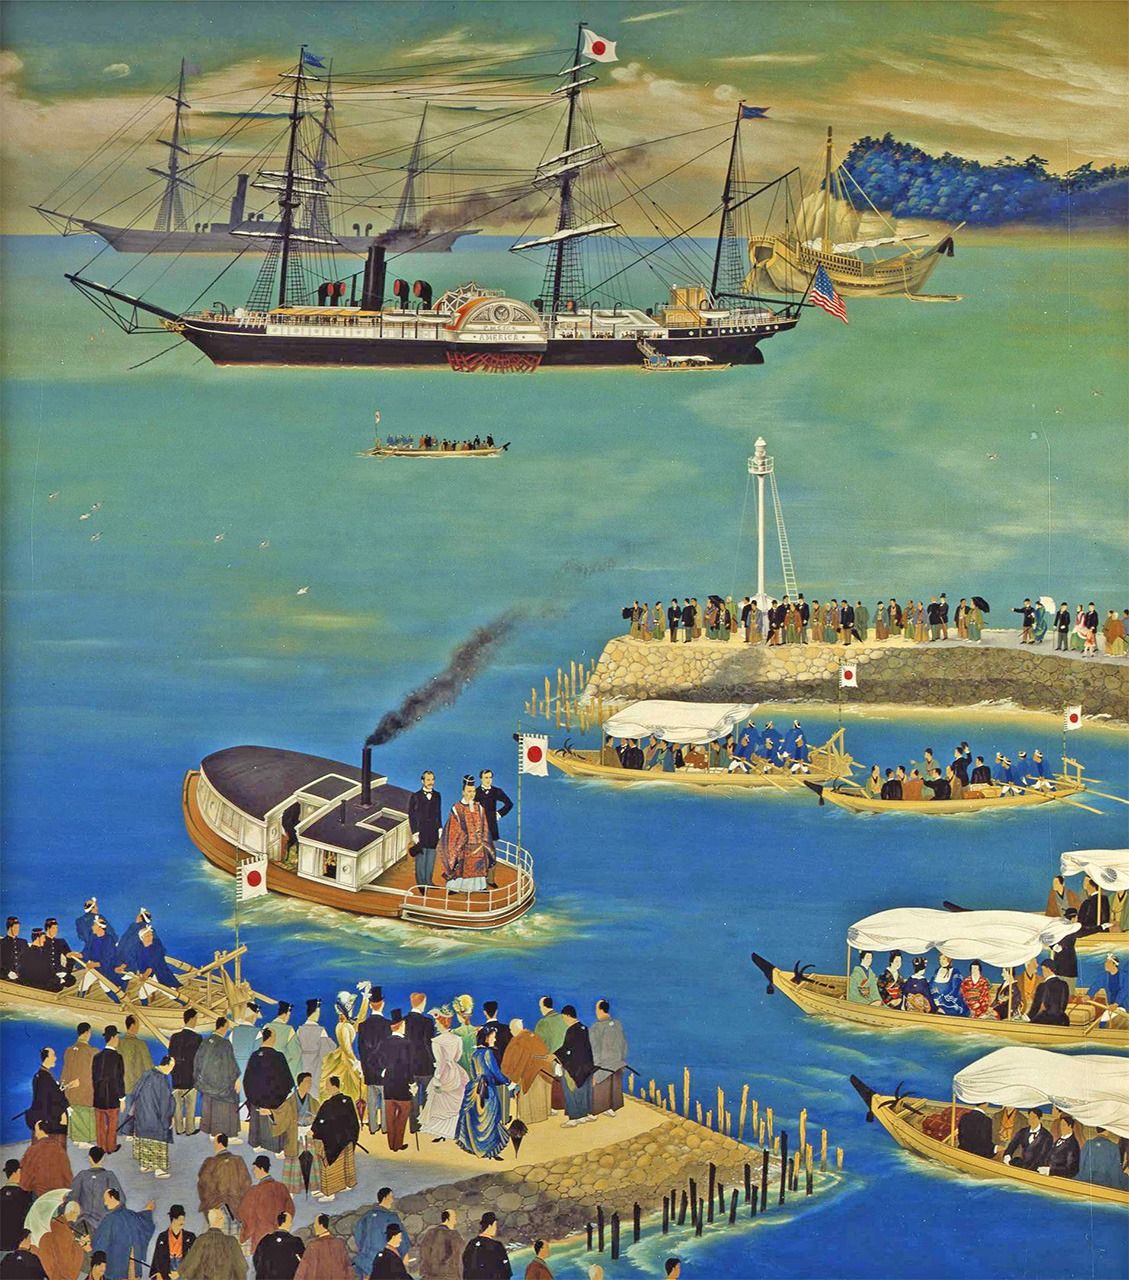 <em>Iwakura taishi Ōbei haken</em> (The Iwakura Mission to America and Europe) by Yamaguchi Hōshun. The SS America in the background is the steamship that transported the group. (Courtesy Meiji Memorial Picture Gallery)